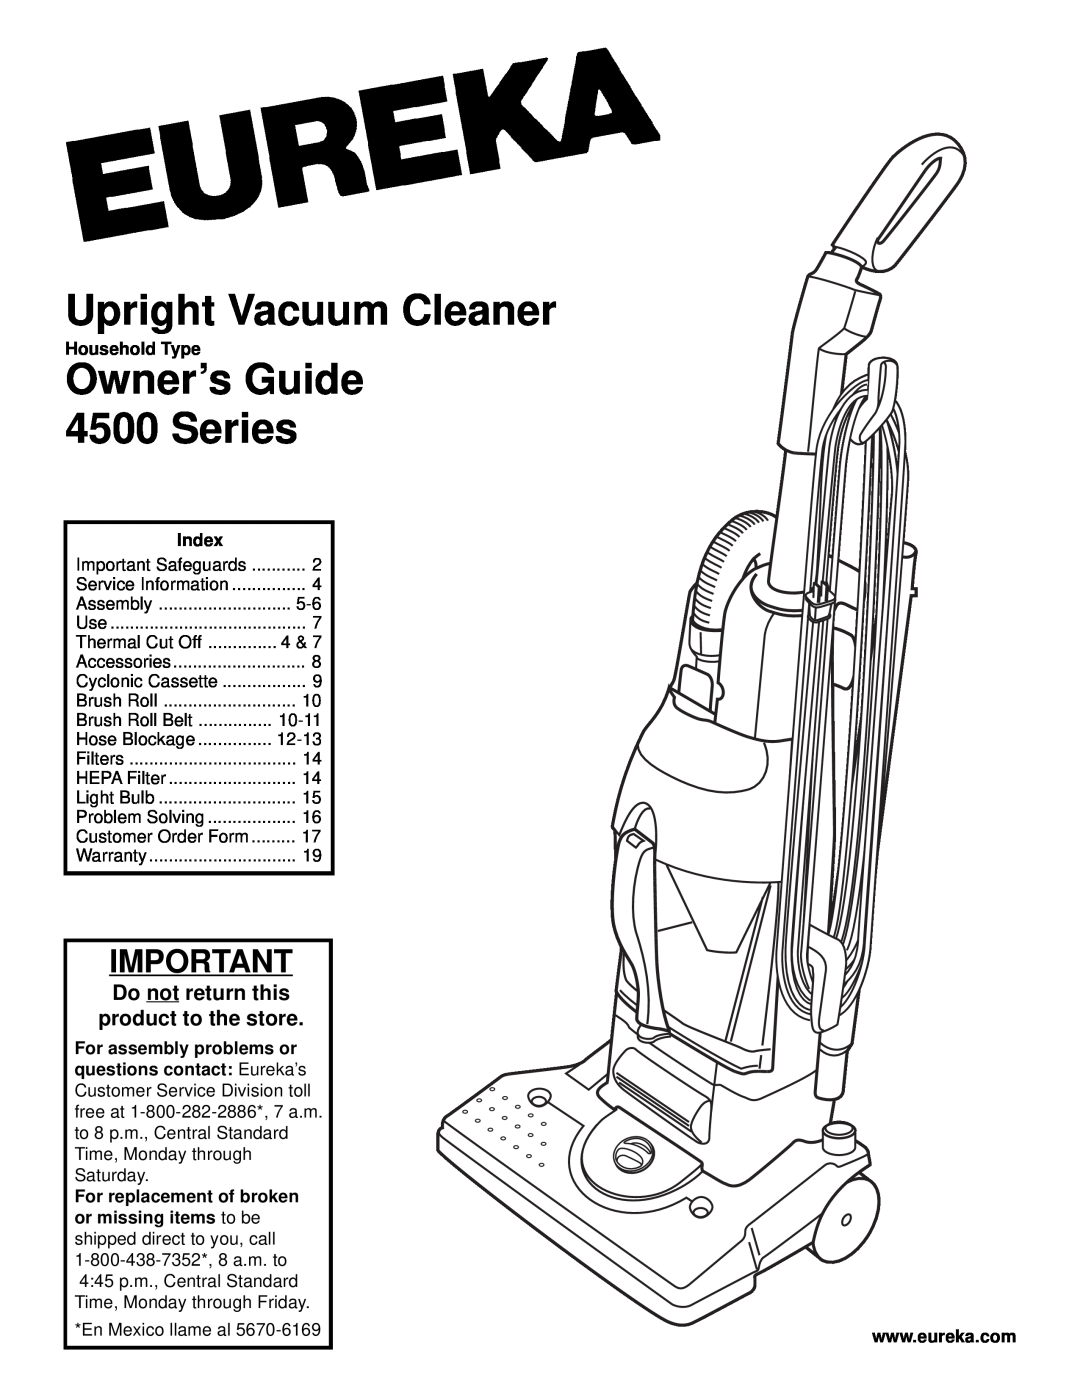 Eureka warranty Upright Vacuum Cleaner, Owner’s Guide 4500 Series, Do not return this product to the store, Index 